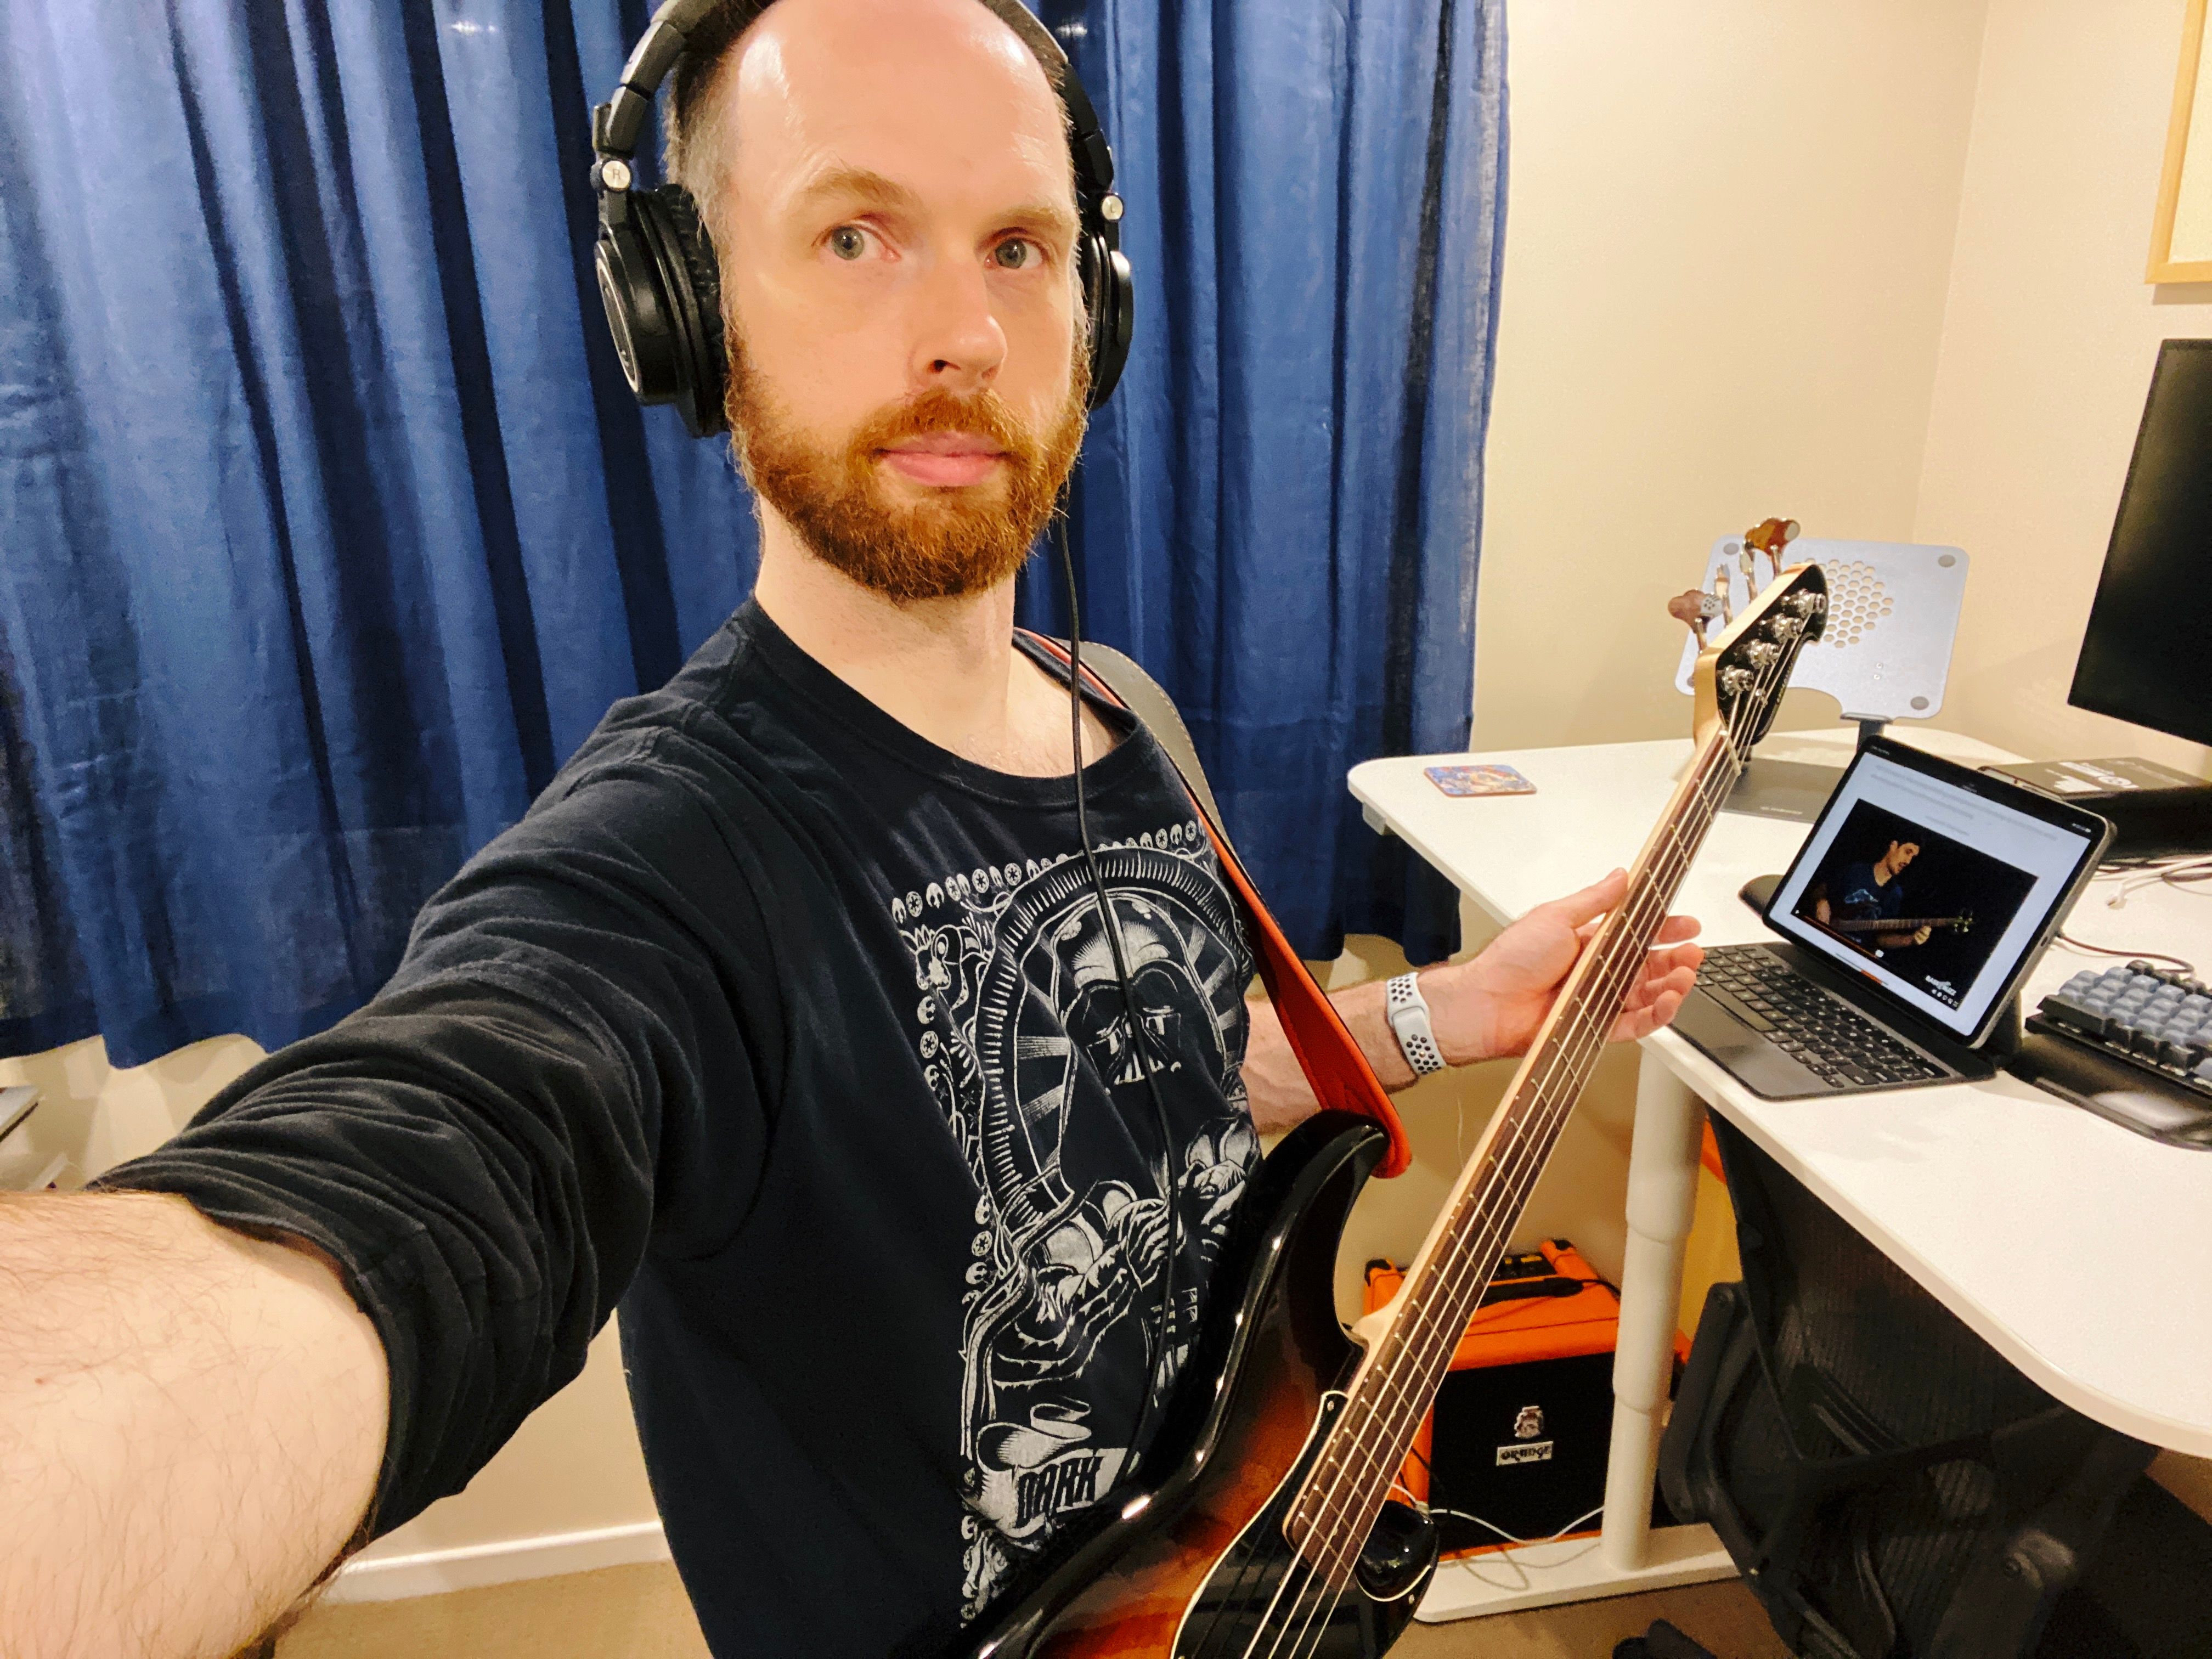 A selfie of me, a white man with short brown hair and an increasingly-scruffy-looking red beard, wearing a black Darth Vader t-shirt. I'm wearing a set of headphones and am holding an extremely handsome-looking bass guitar, a Yamaha BB-434 in Tabacco Sunburst (the colour starts in the middle of the body as a rich deep orange/red colour and fades to black as it gets towards the edge of the body). My iPad is sitting on the standing desk next to me, paused in the middle of a lesson from Josh Fossgreen's "Beginner to Badass" bass guitar course (highly recommended if you're interested in learning bass).